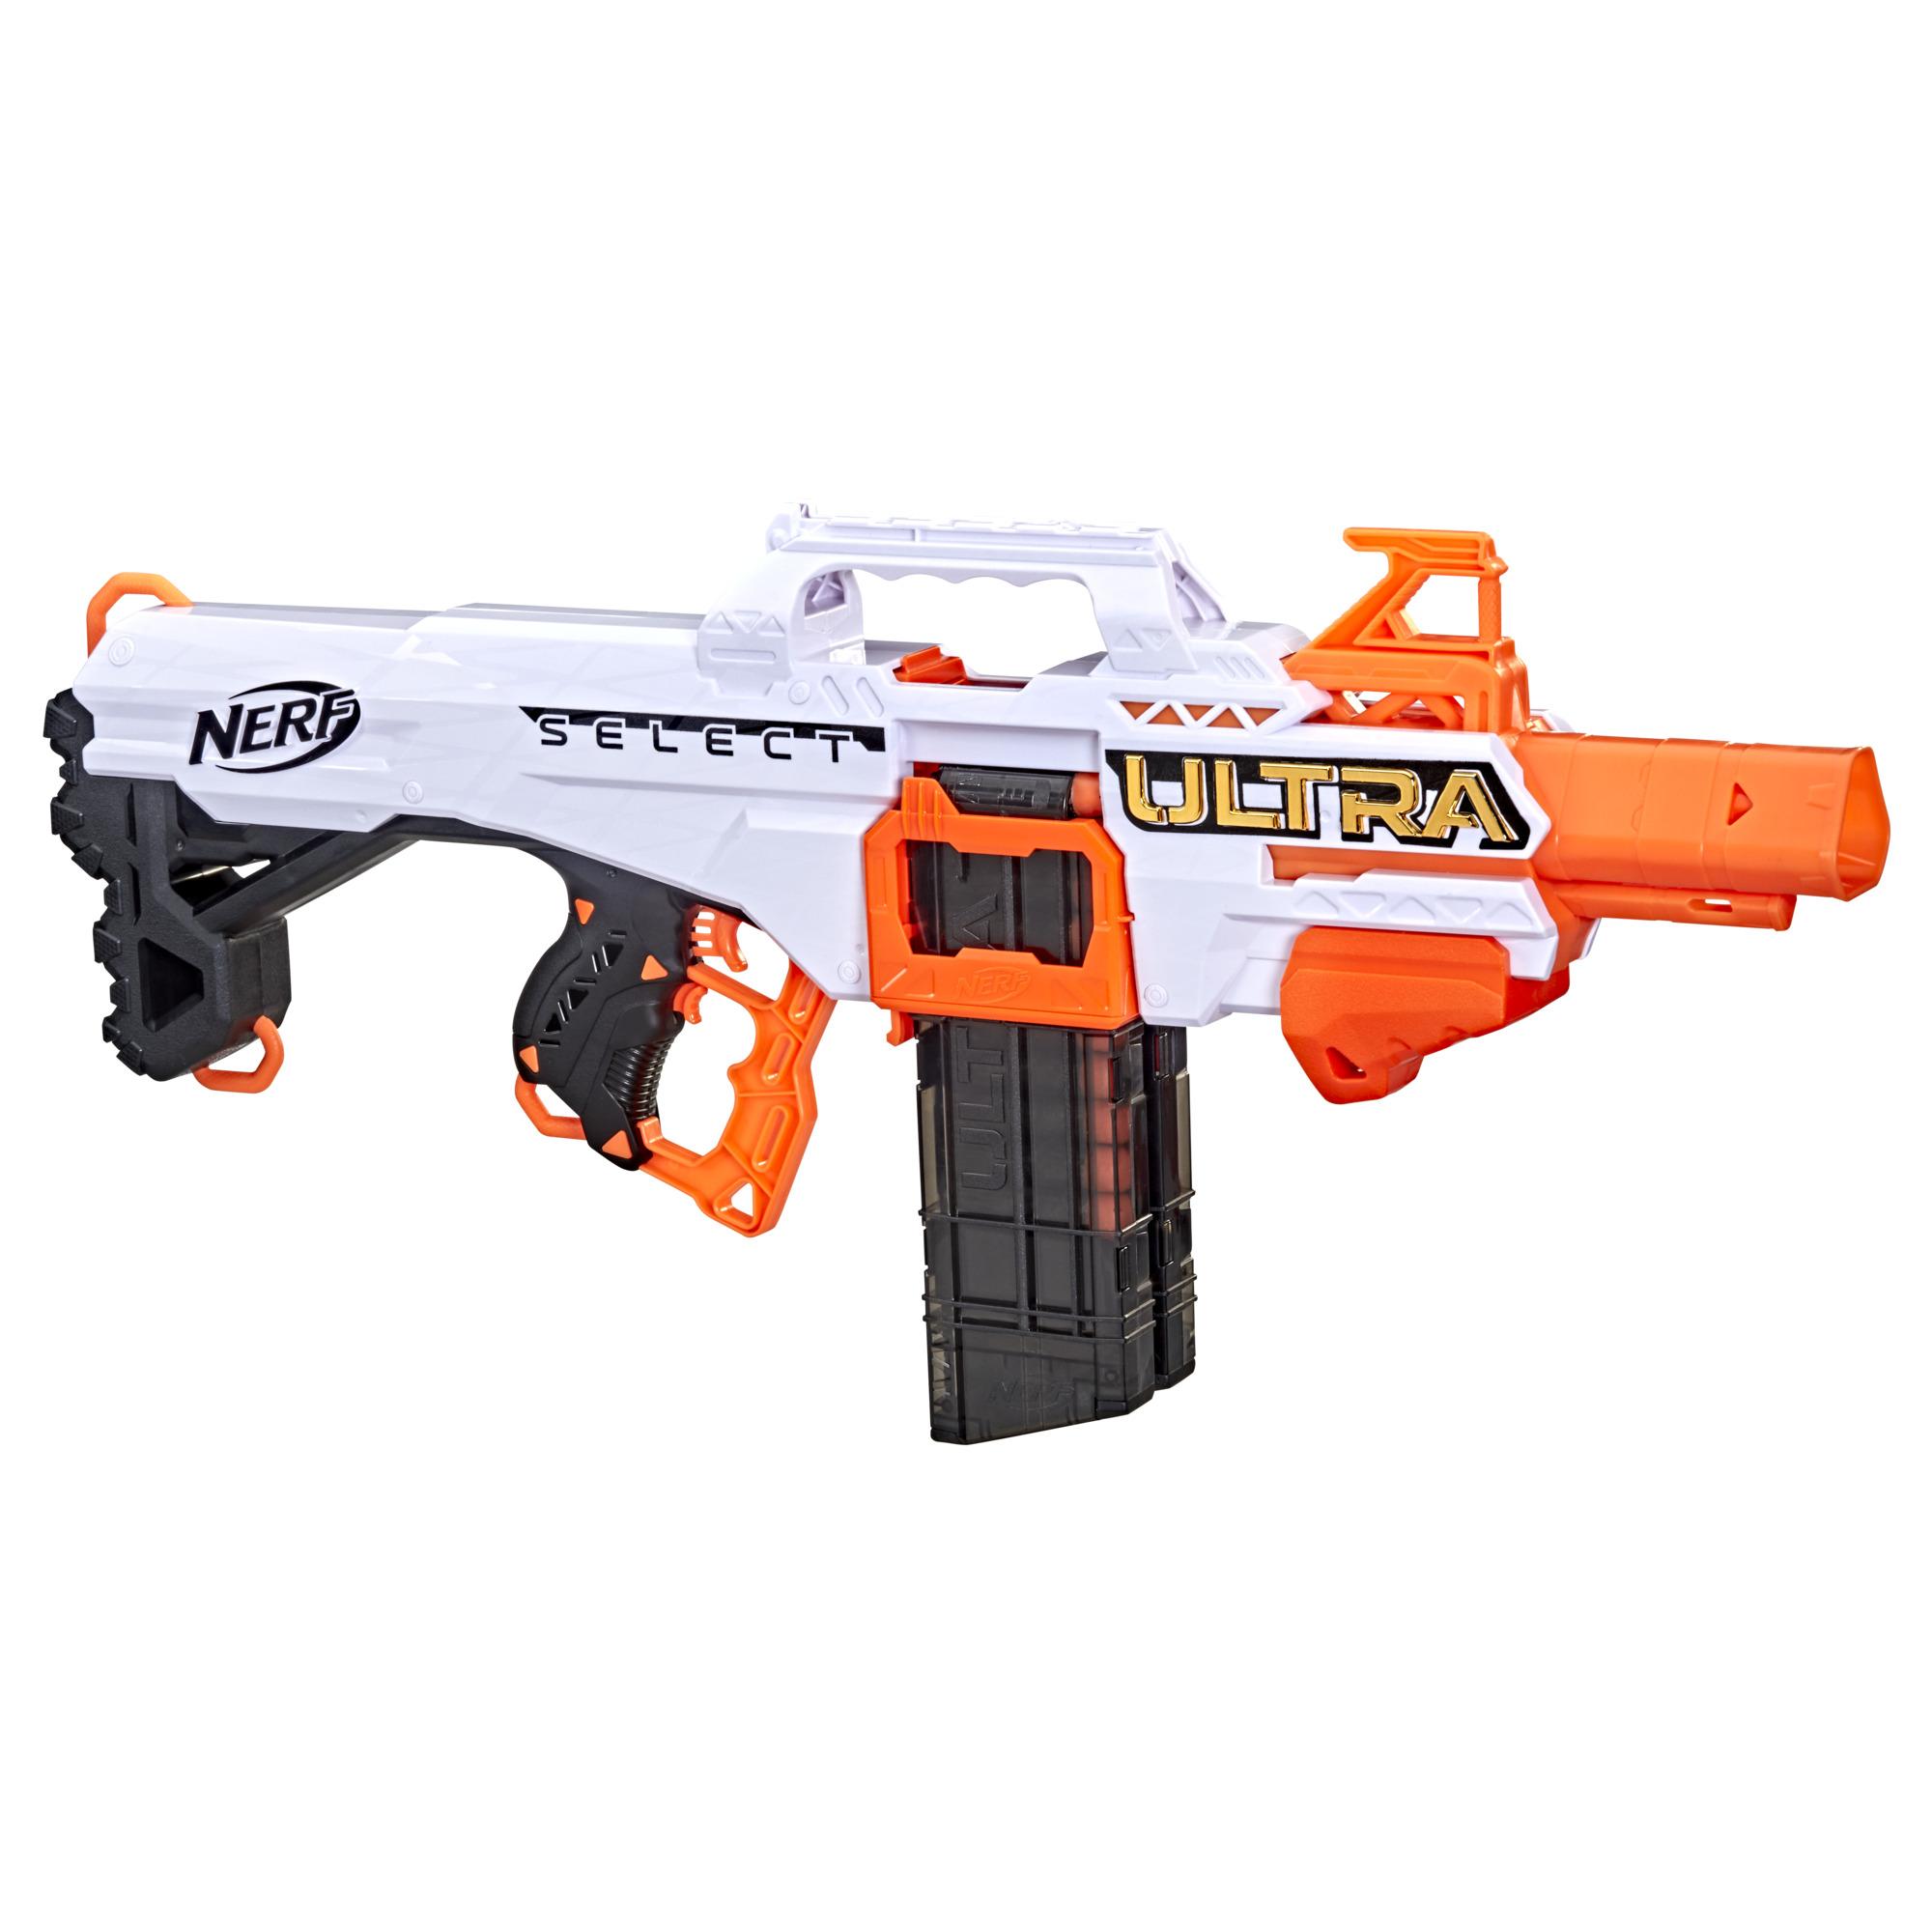 Verplicht Virus tumor Nerf Ultra Select Fully Motorized Blaster, Fire 2 Ways, Includes Clips and  Darts, Compatible Only with Nerf Ultra Darts | Nerf